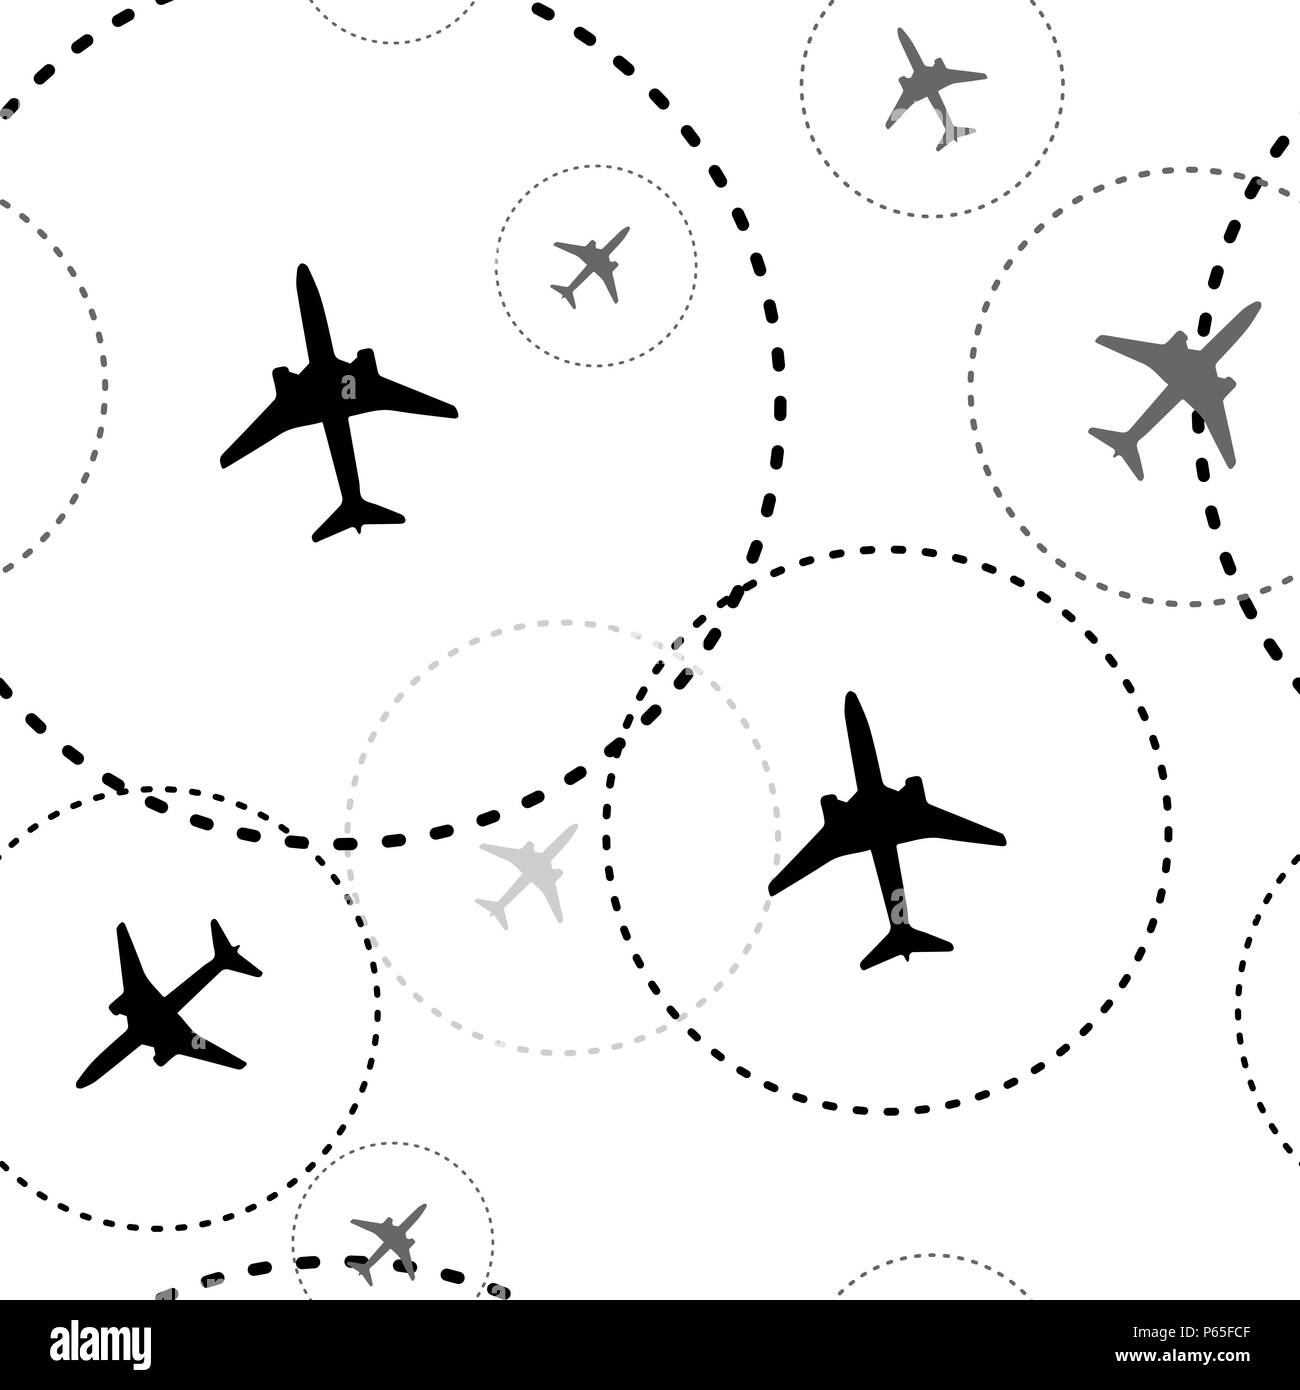 Air travel. Dotted lines are flight paths of commercial airline passenger jet airplanes. Abstract Illustration eps10 Stock Vector